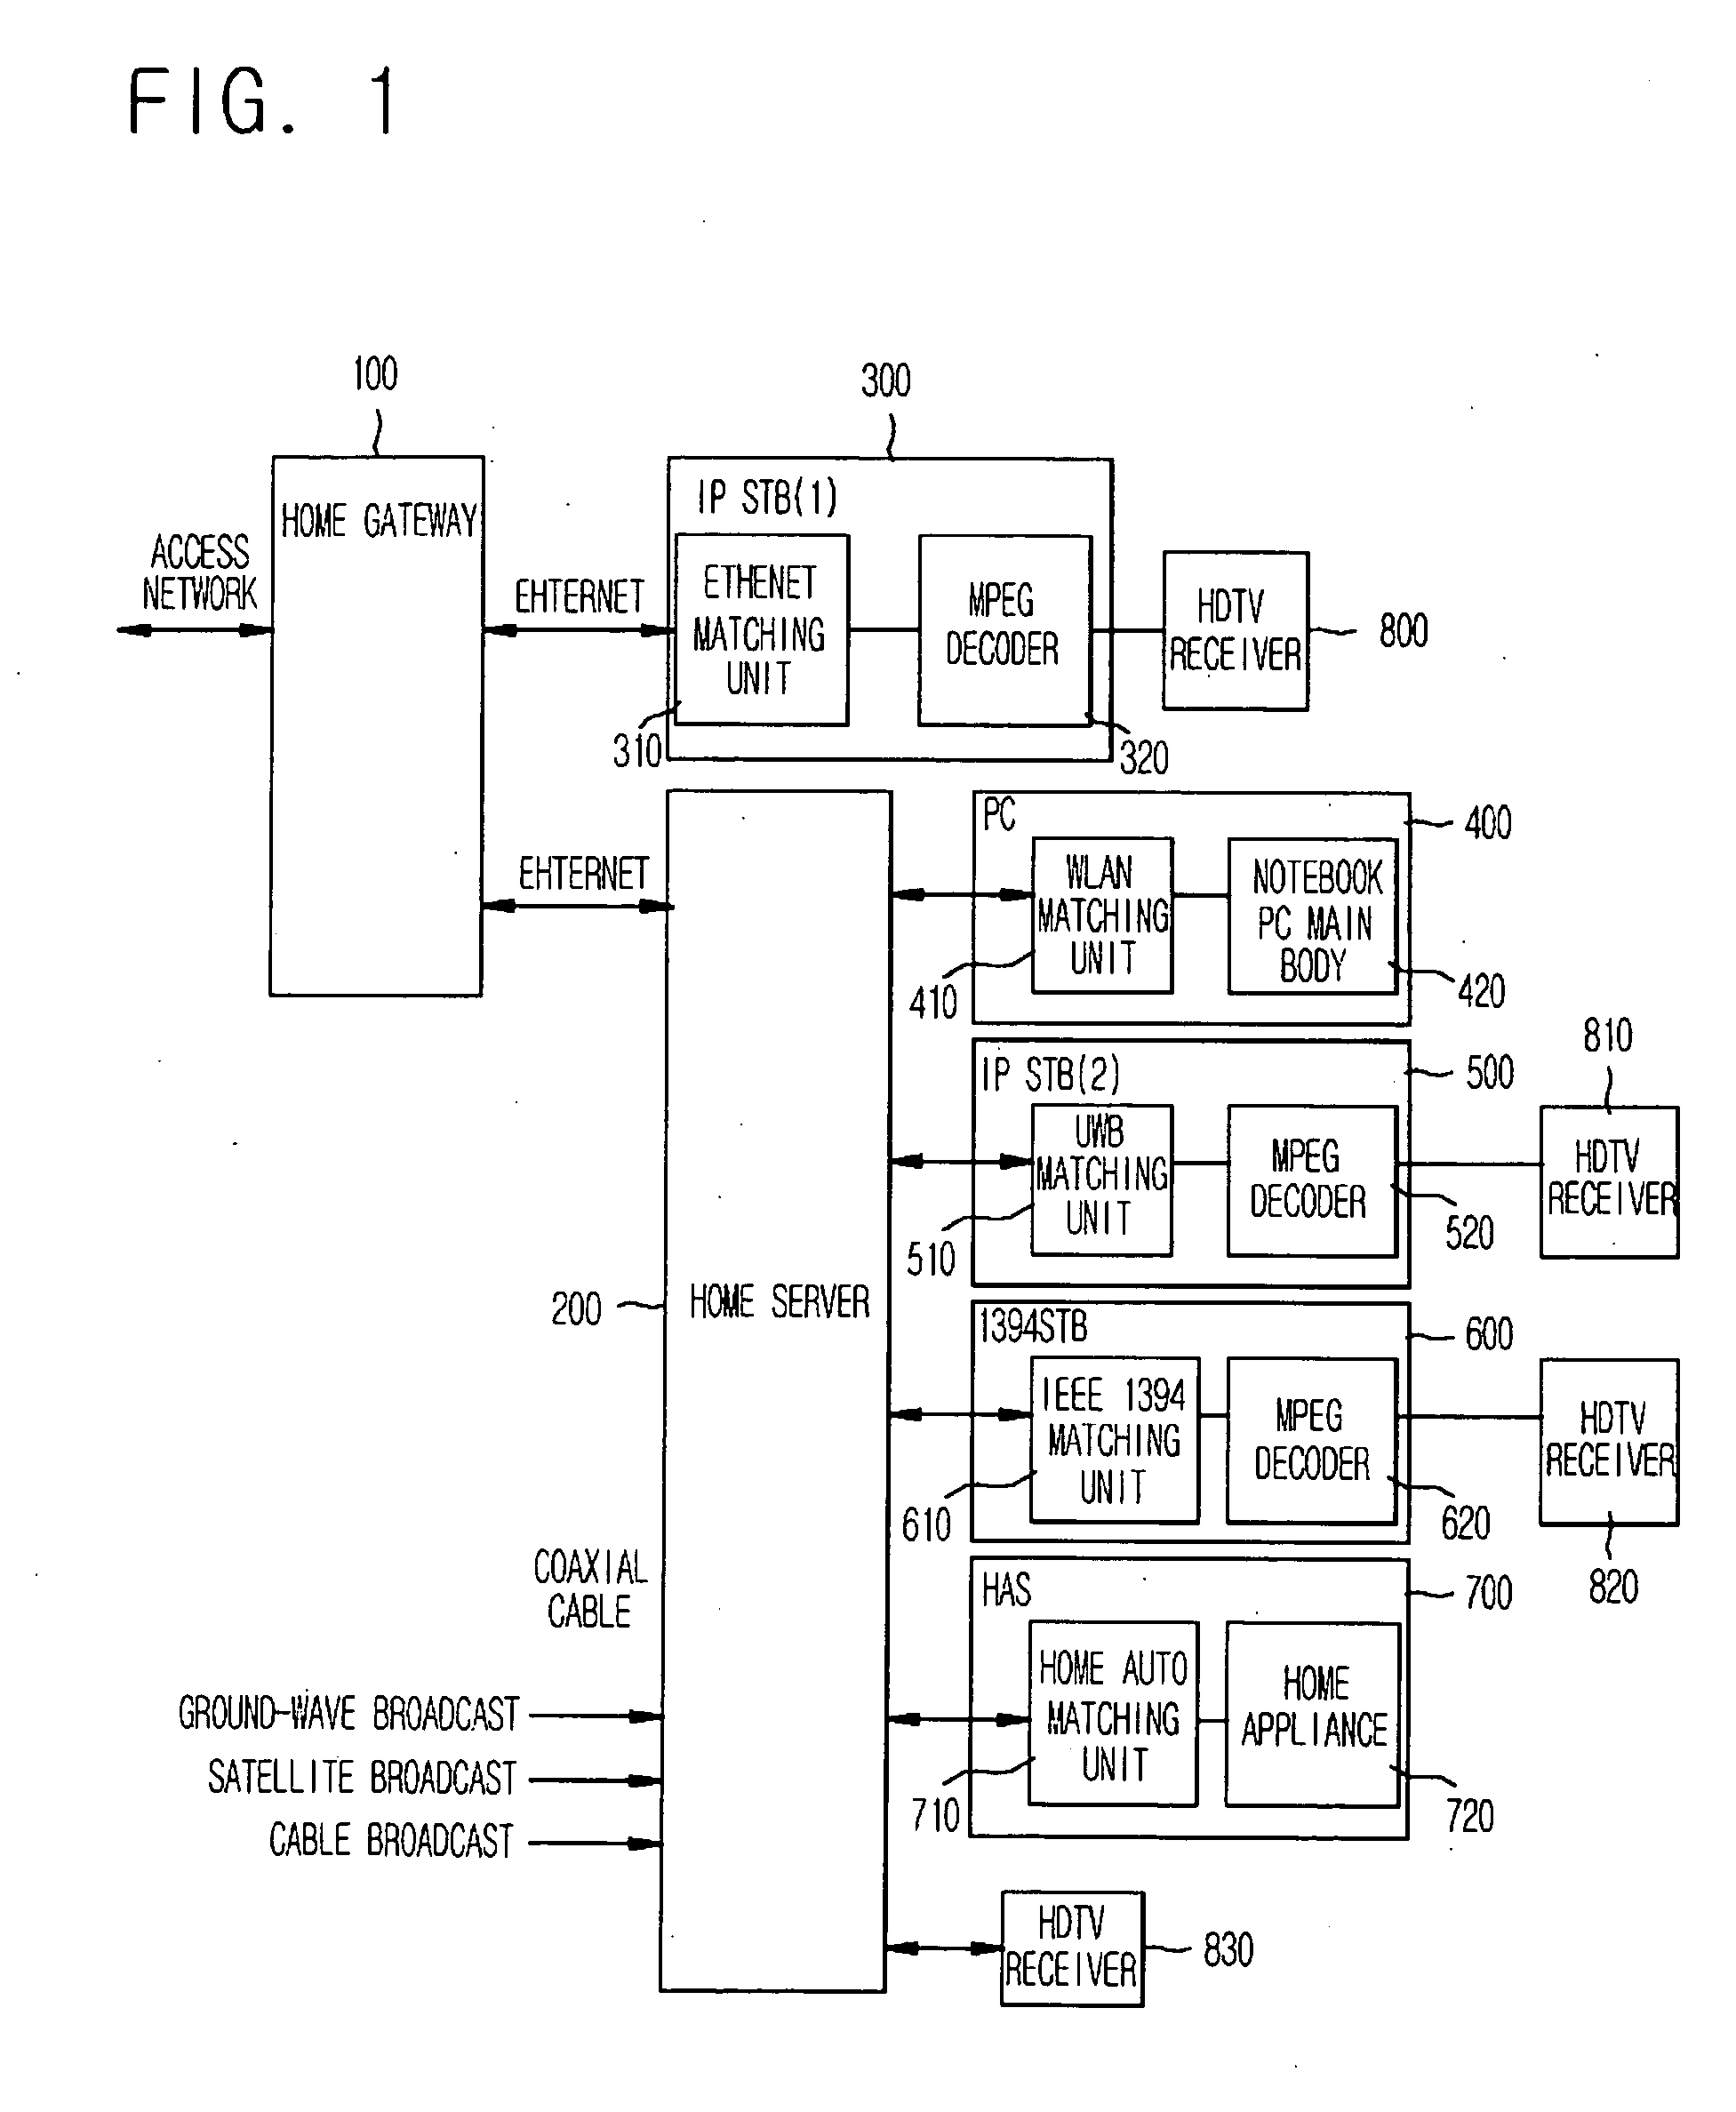 Apparatus for distributing same/different digital broadcasting streams in heterogeneous home network and method thereof